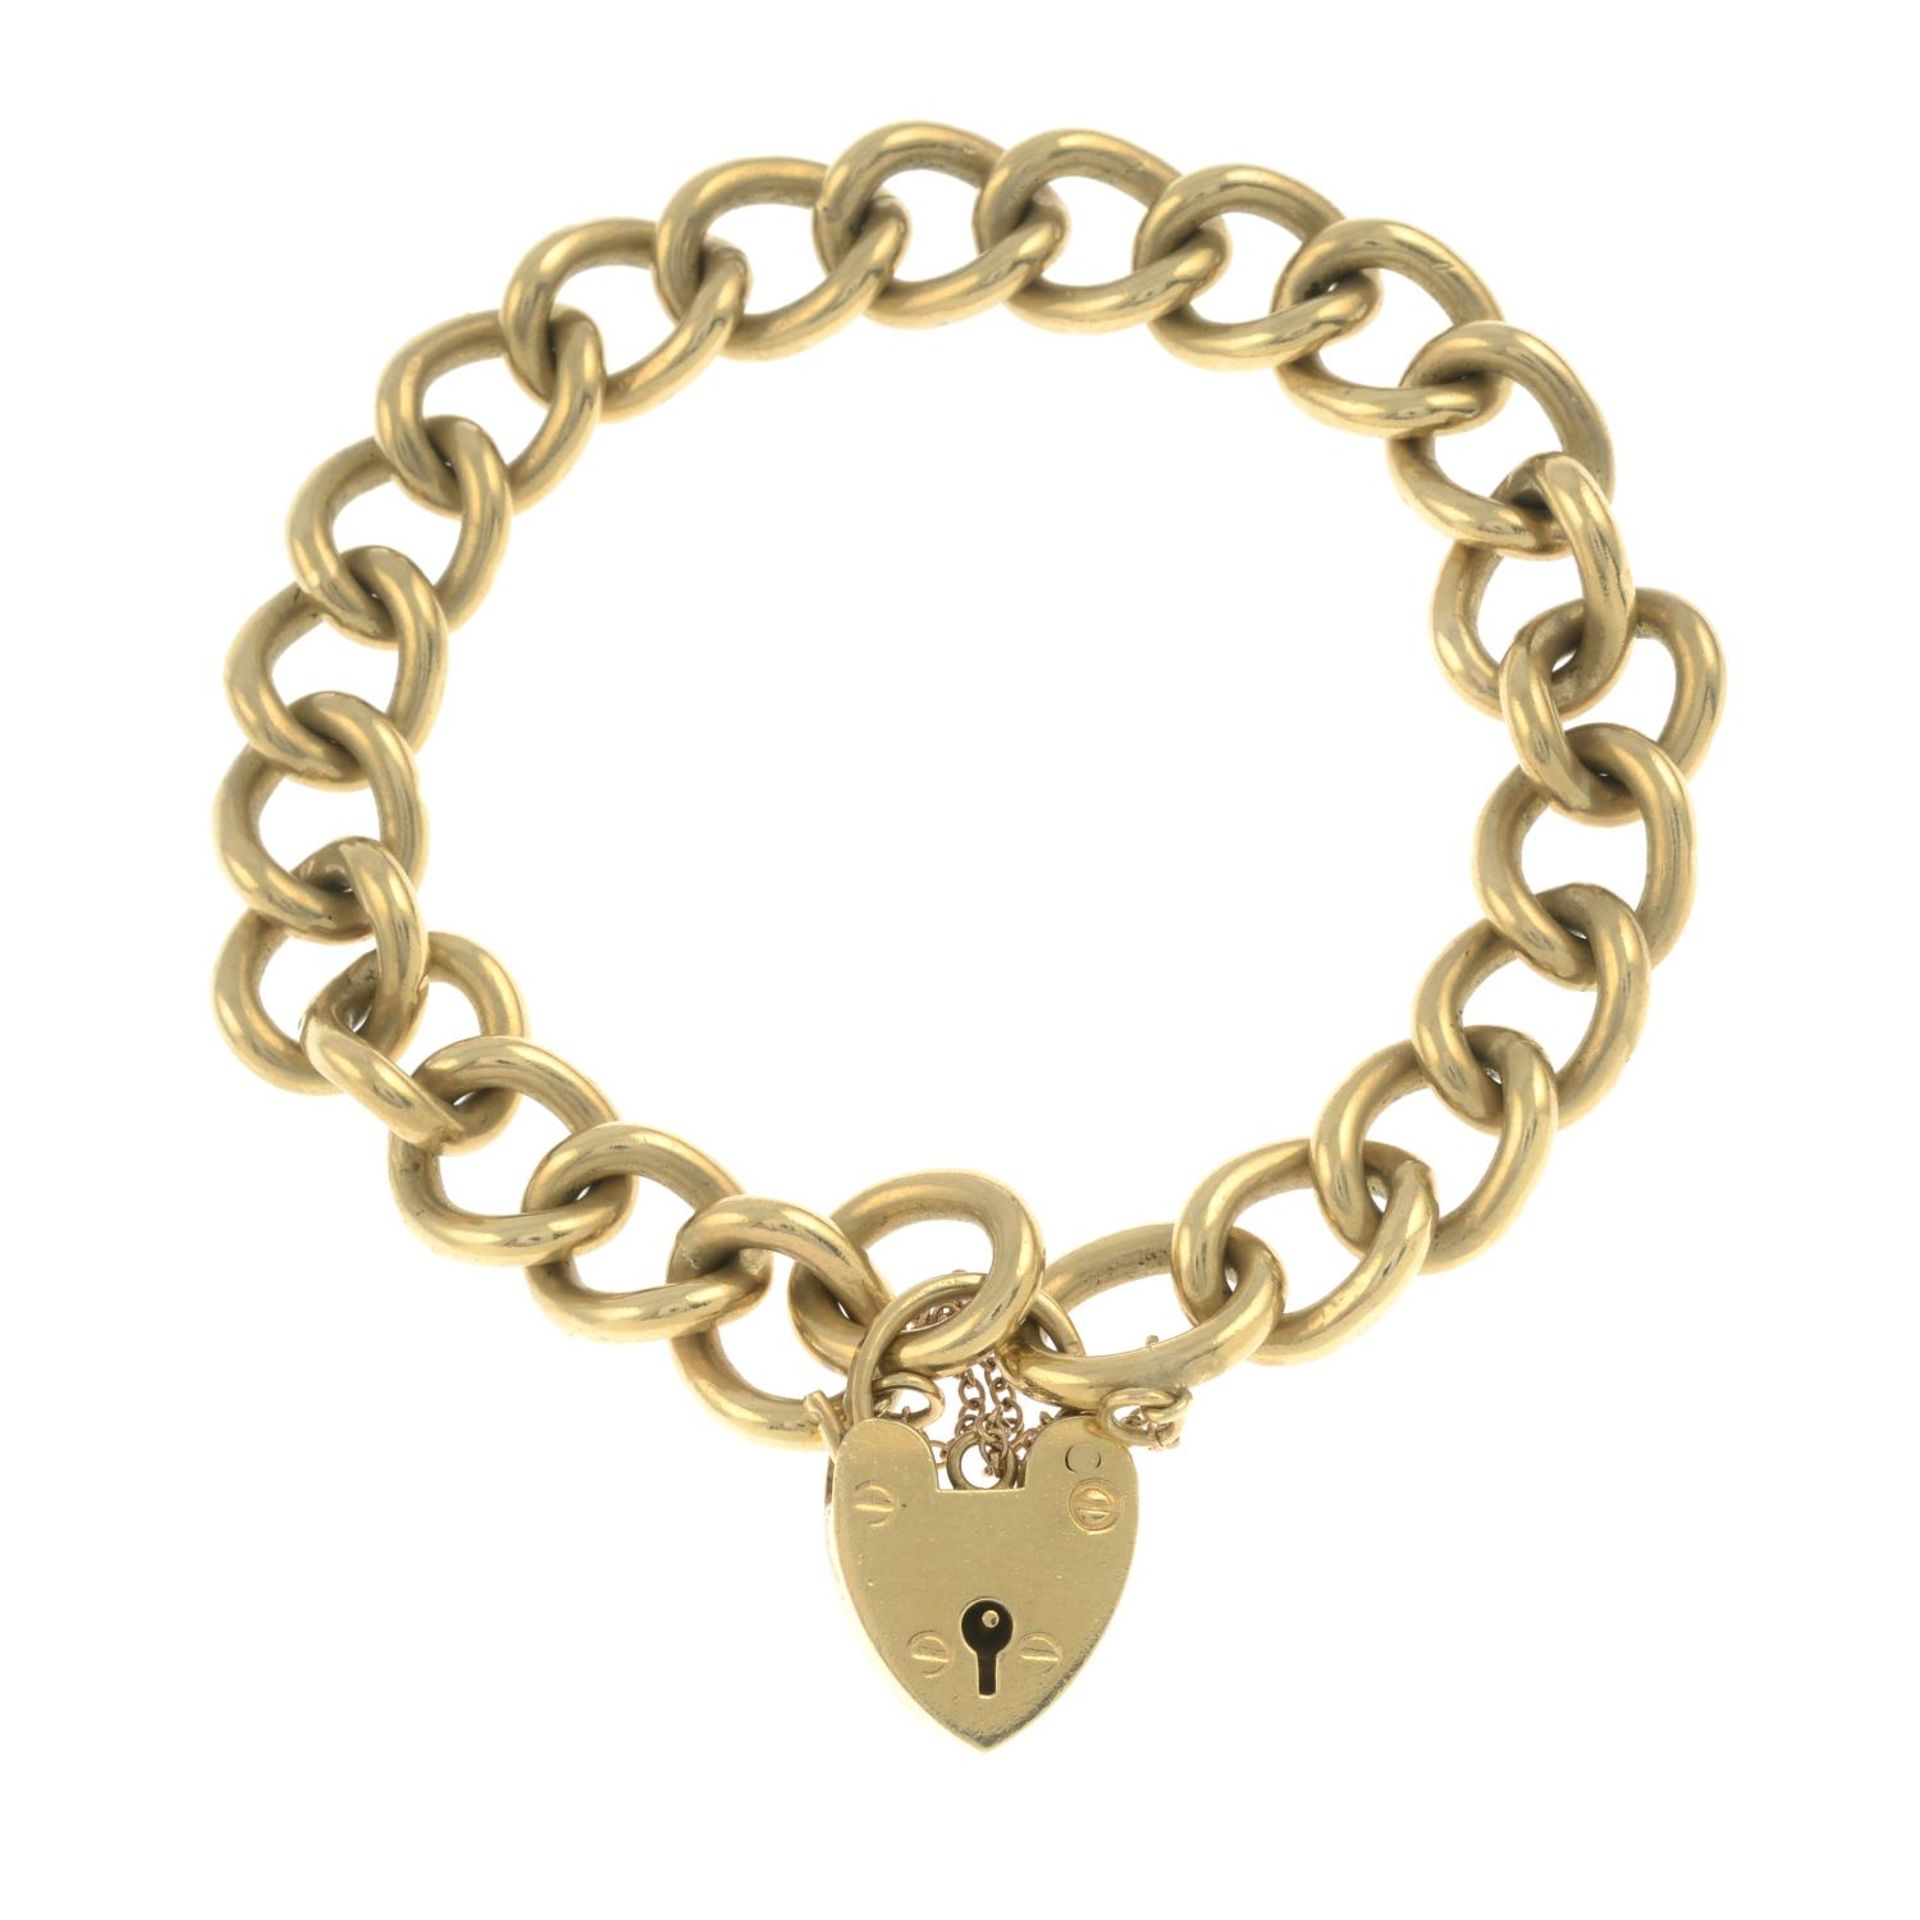 A trace-link chain, with 9ct heart-shape padlock clasp.Bracelet stamped 9ct.